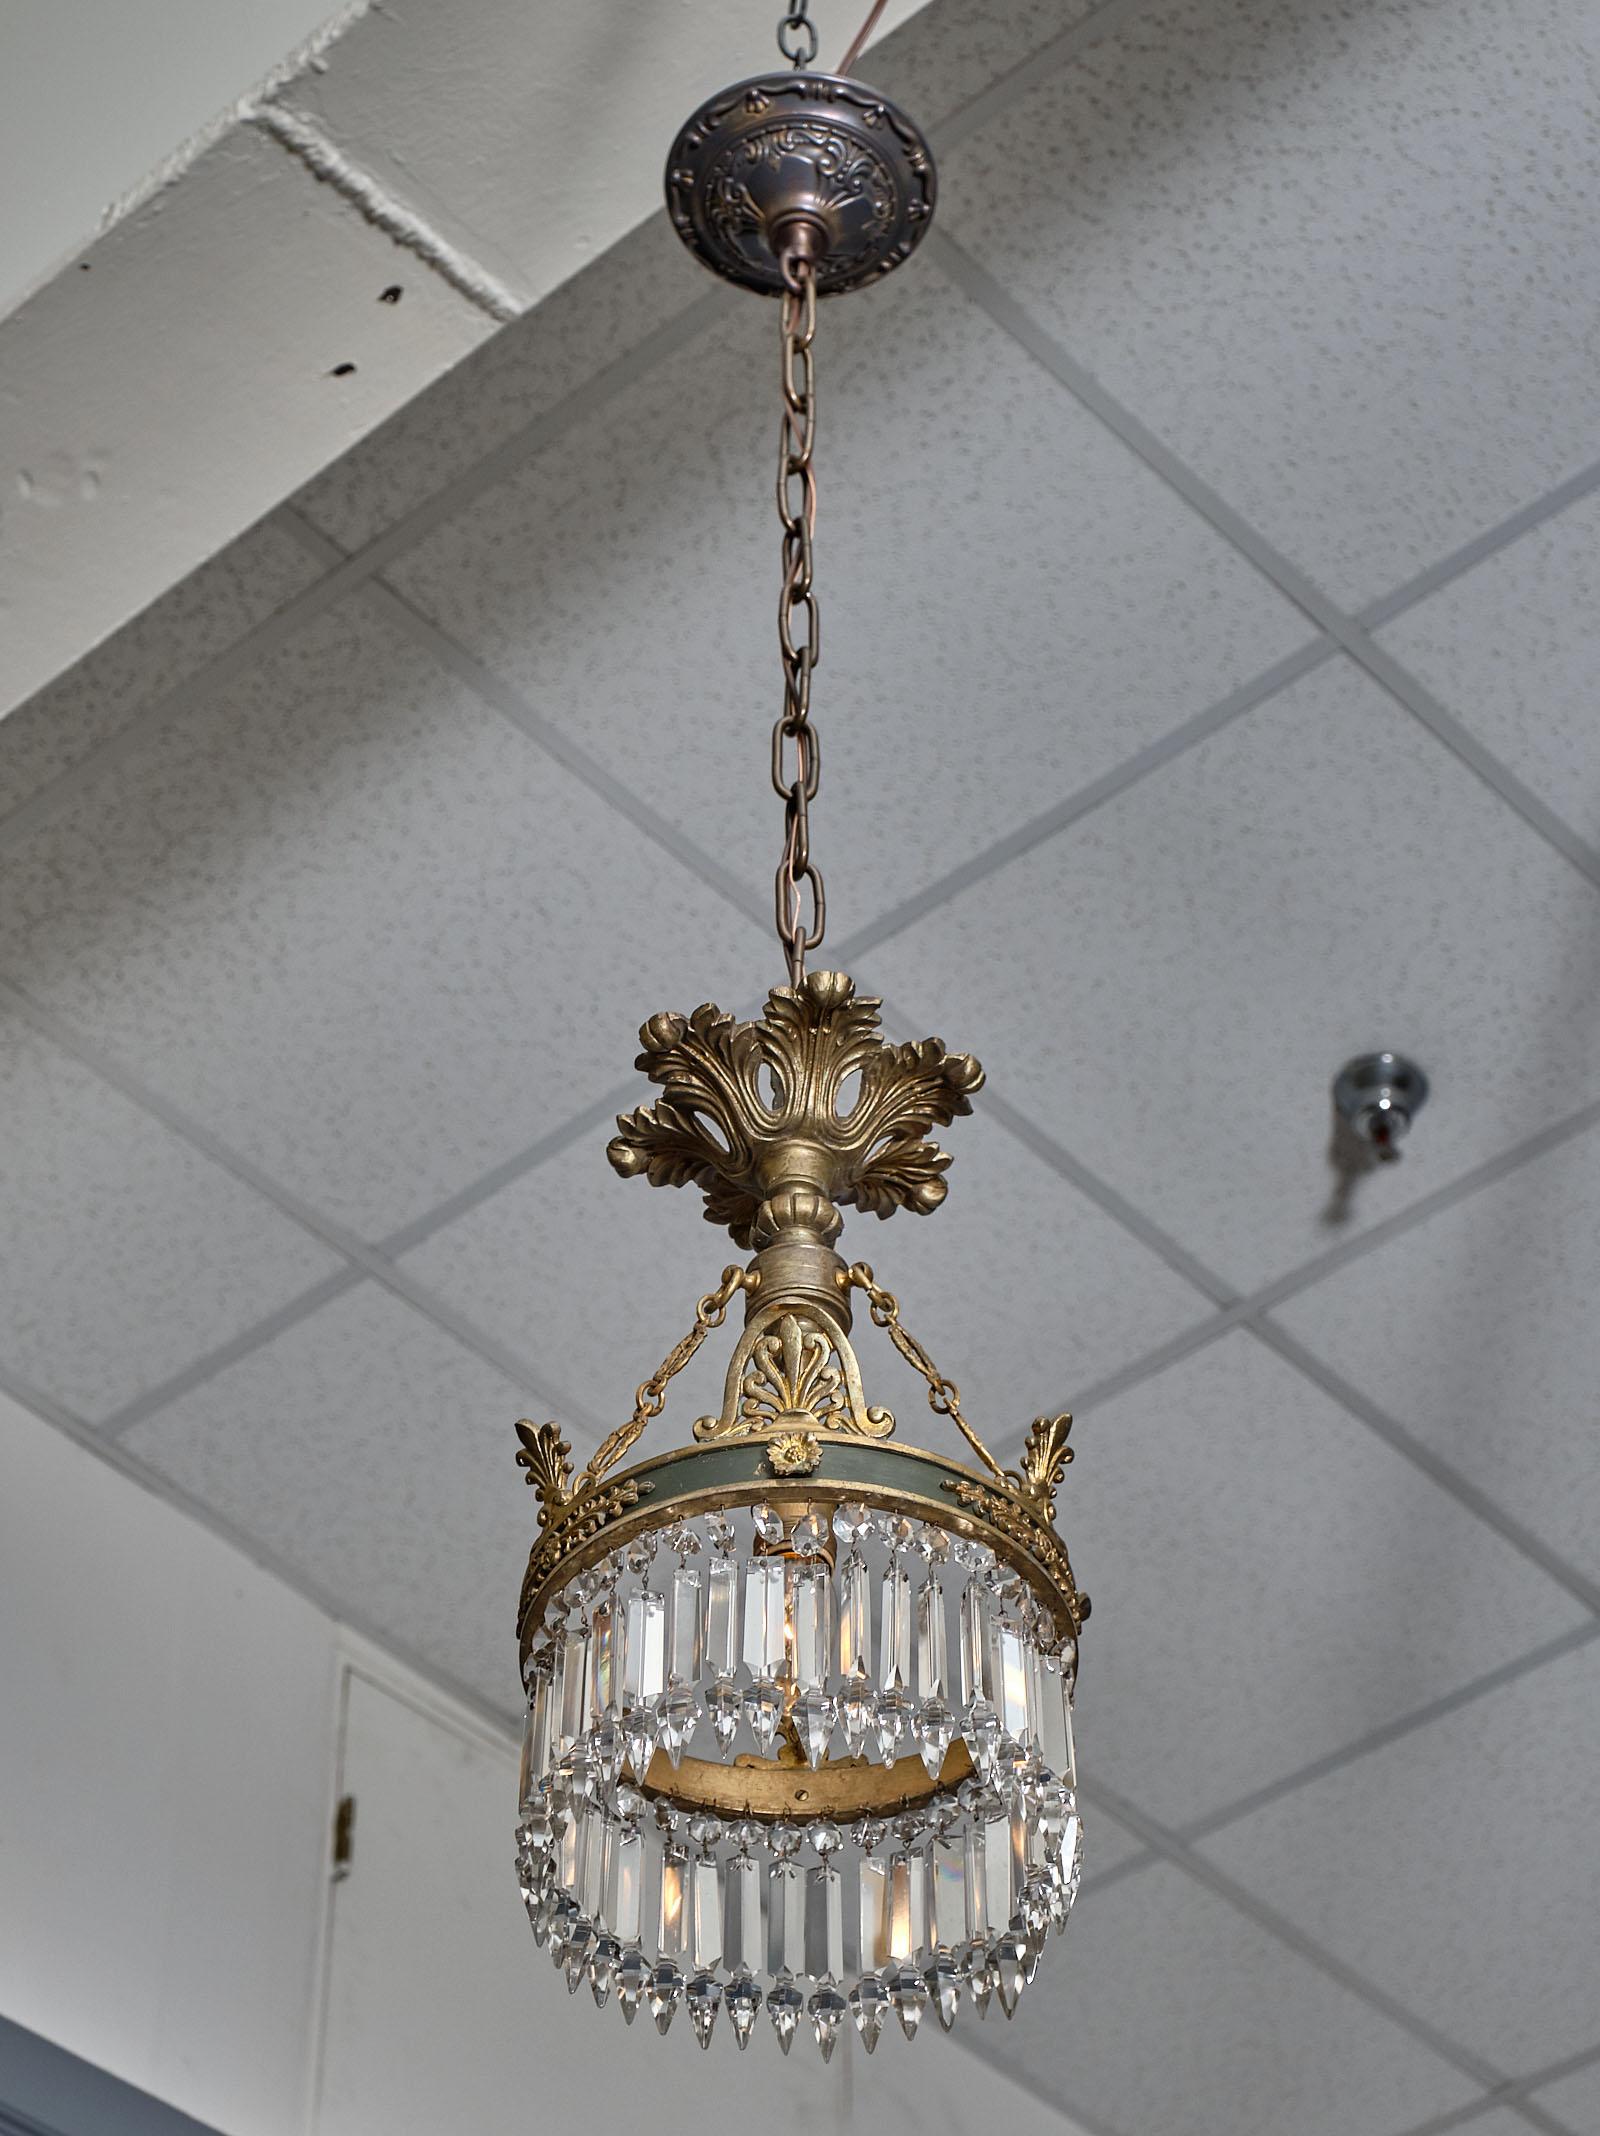 Empire French crystal chandelier pendant made of gilt bronze and lacquer. There are lovely finely cut crystal and the chandelier has been newly wired to fit US standards.